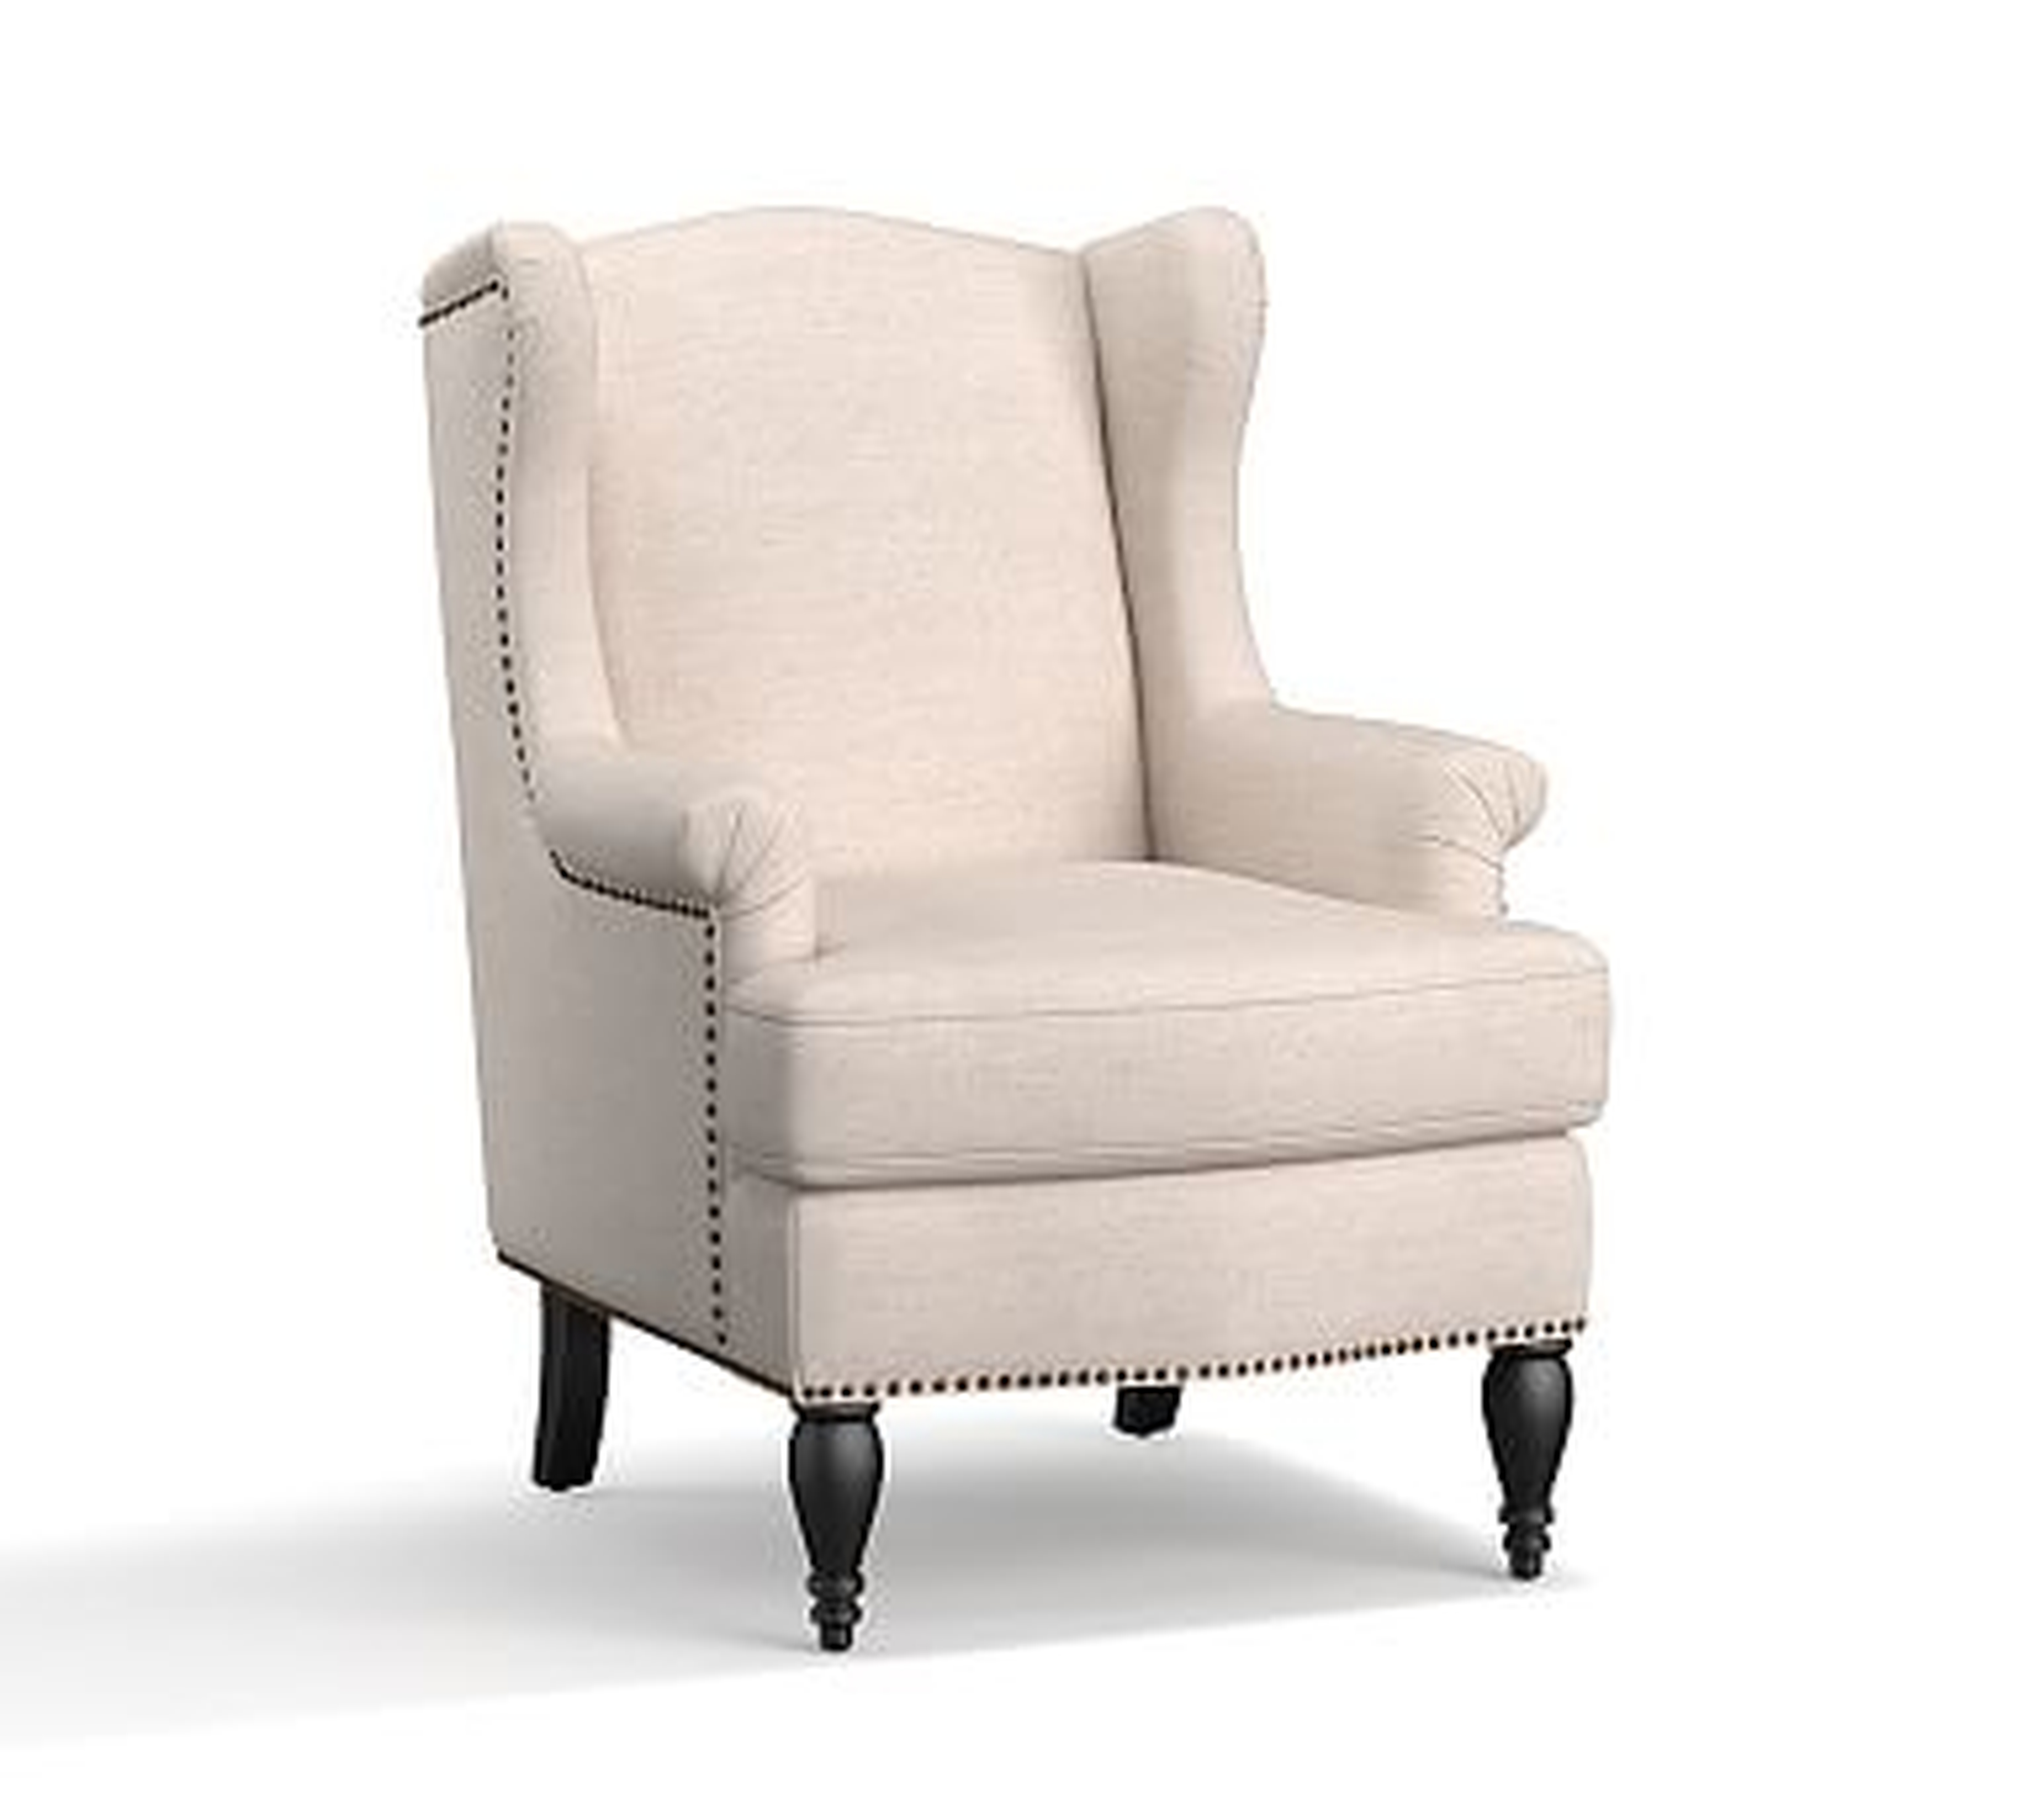 SoMa Delancey Upholstered Wingback Armchair, Polyester Wrapped Cushions, Washed Linen/Cotton Ivory - Pottery Barn